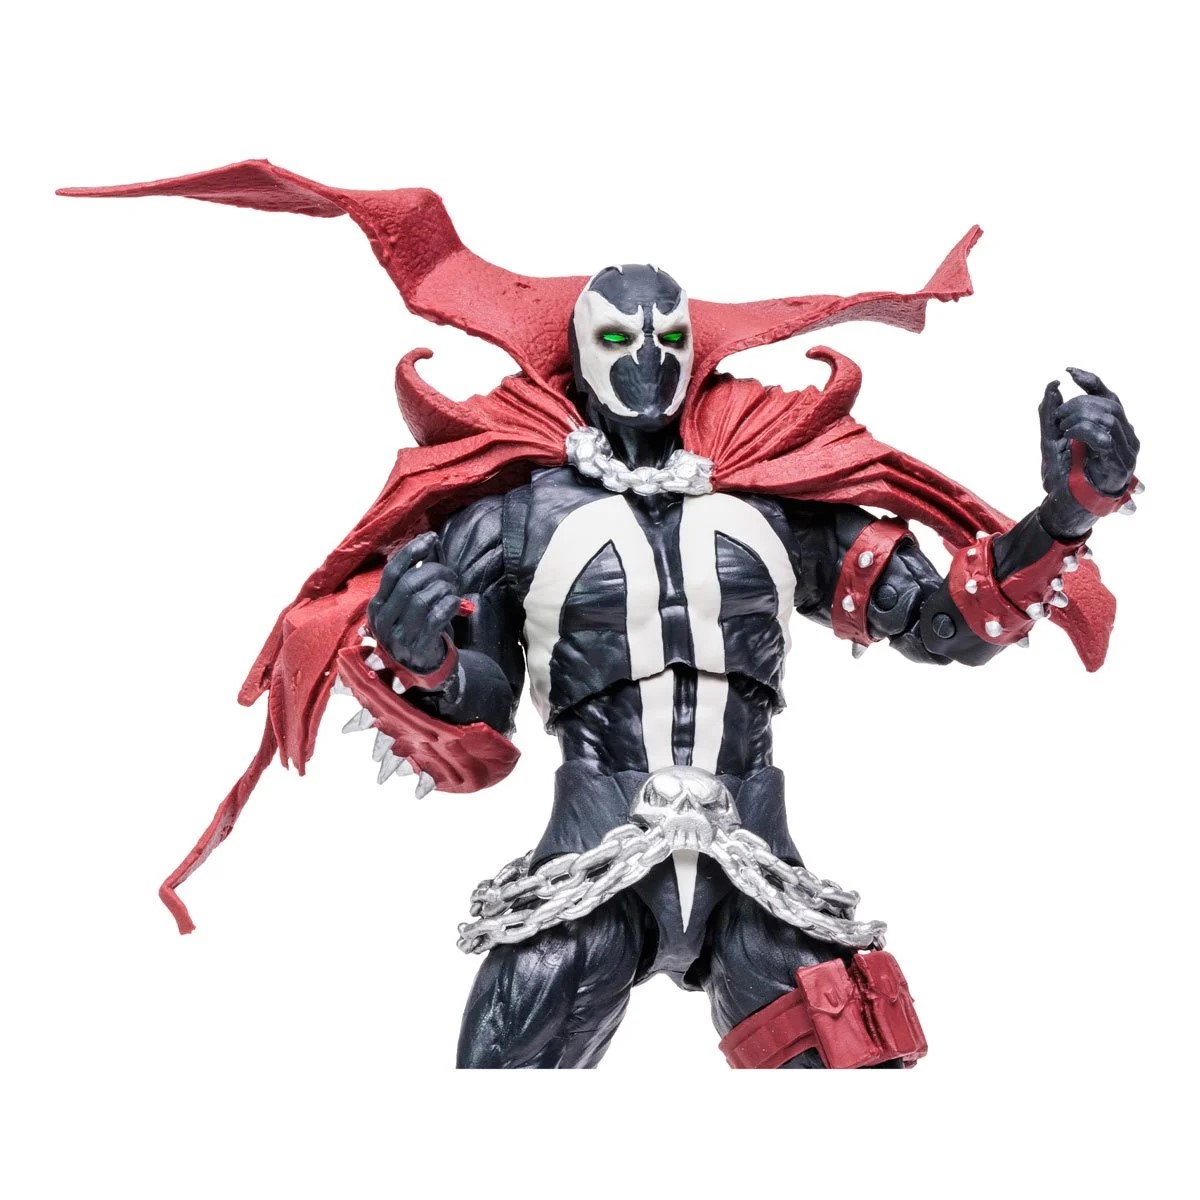 Spawn Deluxe 7-Inch Scale Action Figure Set a1jpg